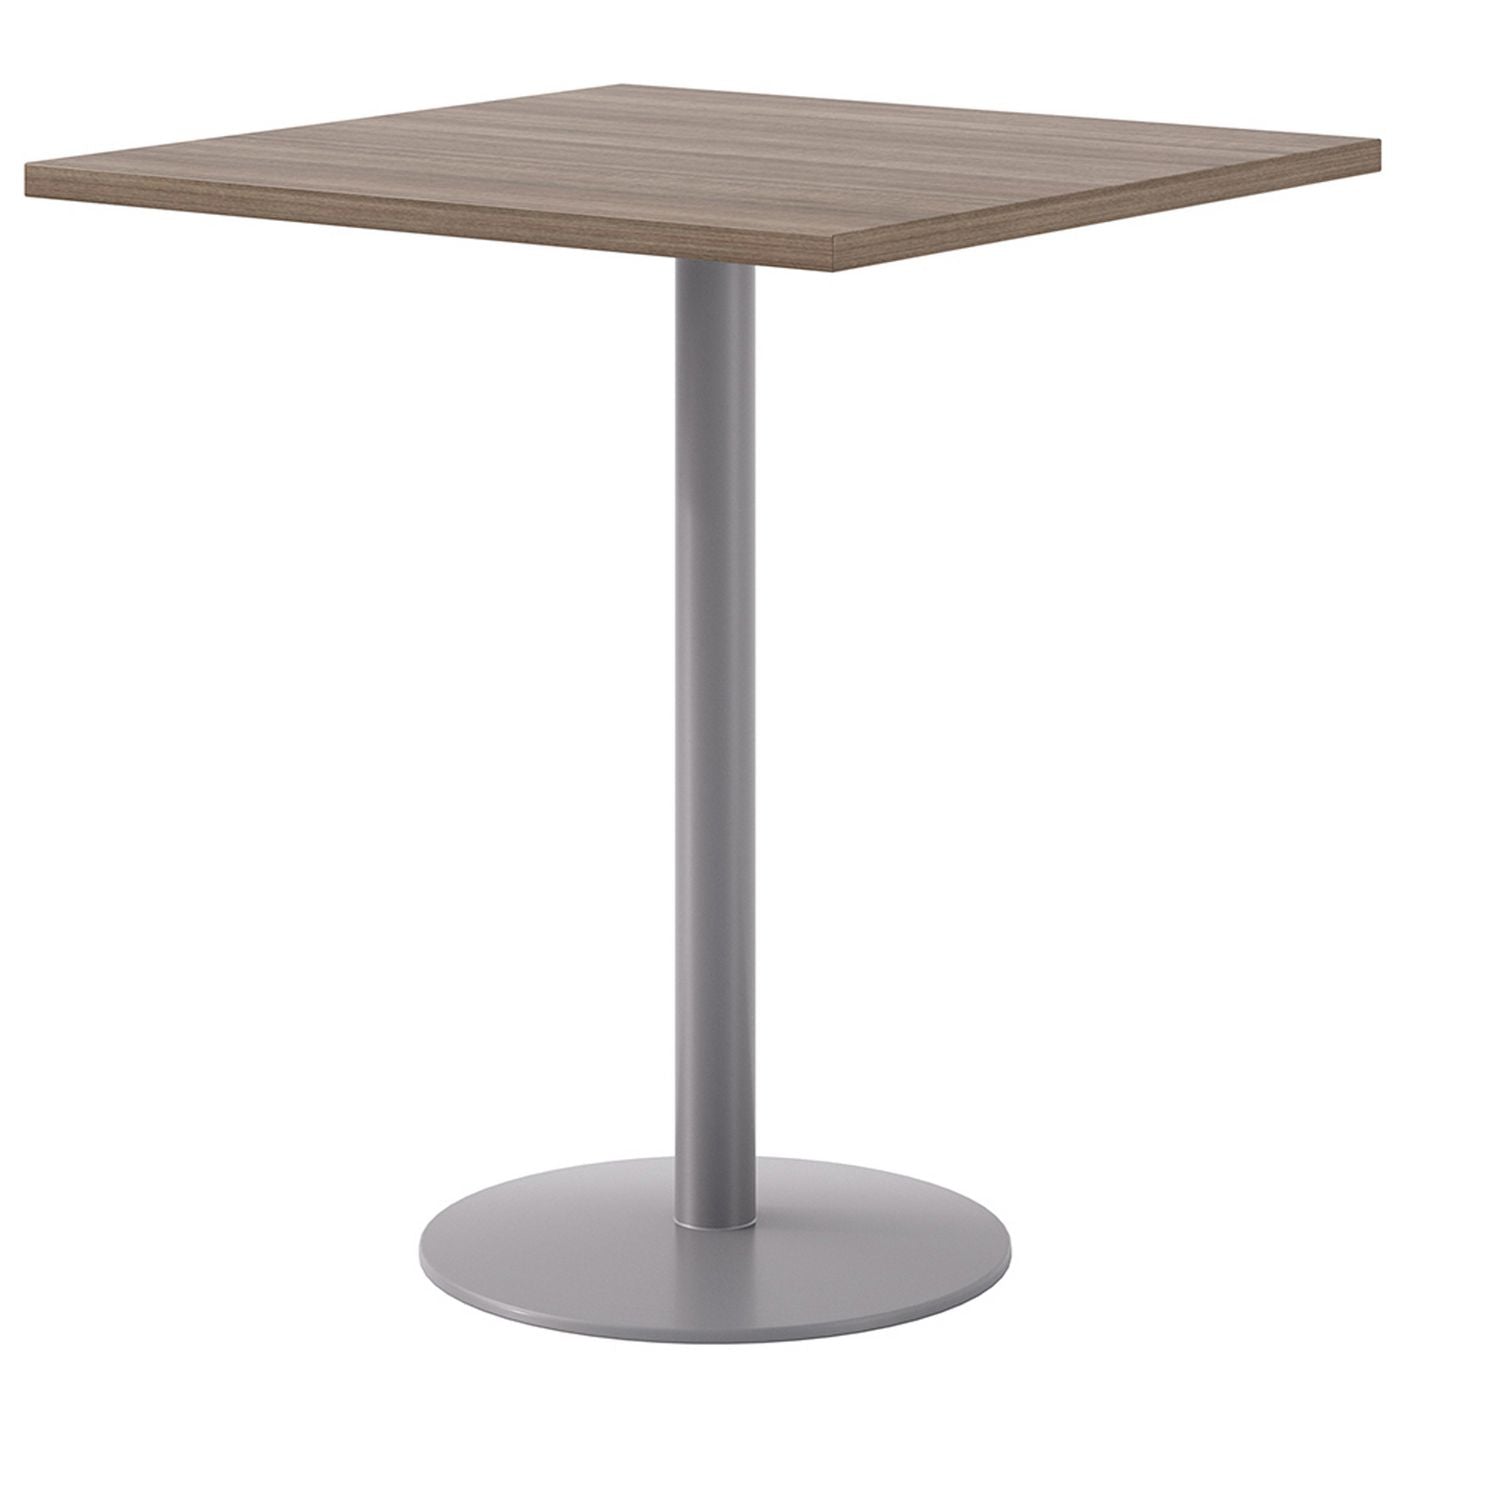 pedestal-bistro-table-with-four-natural-jive-series-barstools-square-36-x-36-x-41-studio-teak-ships-in-4-6-business-days_kfi811774039925 - 2